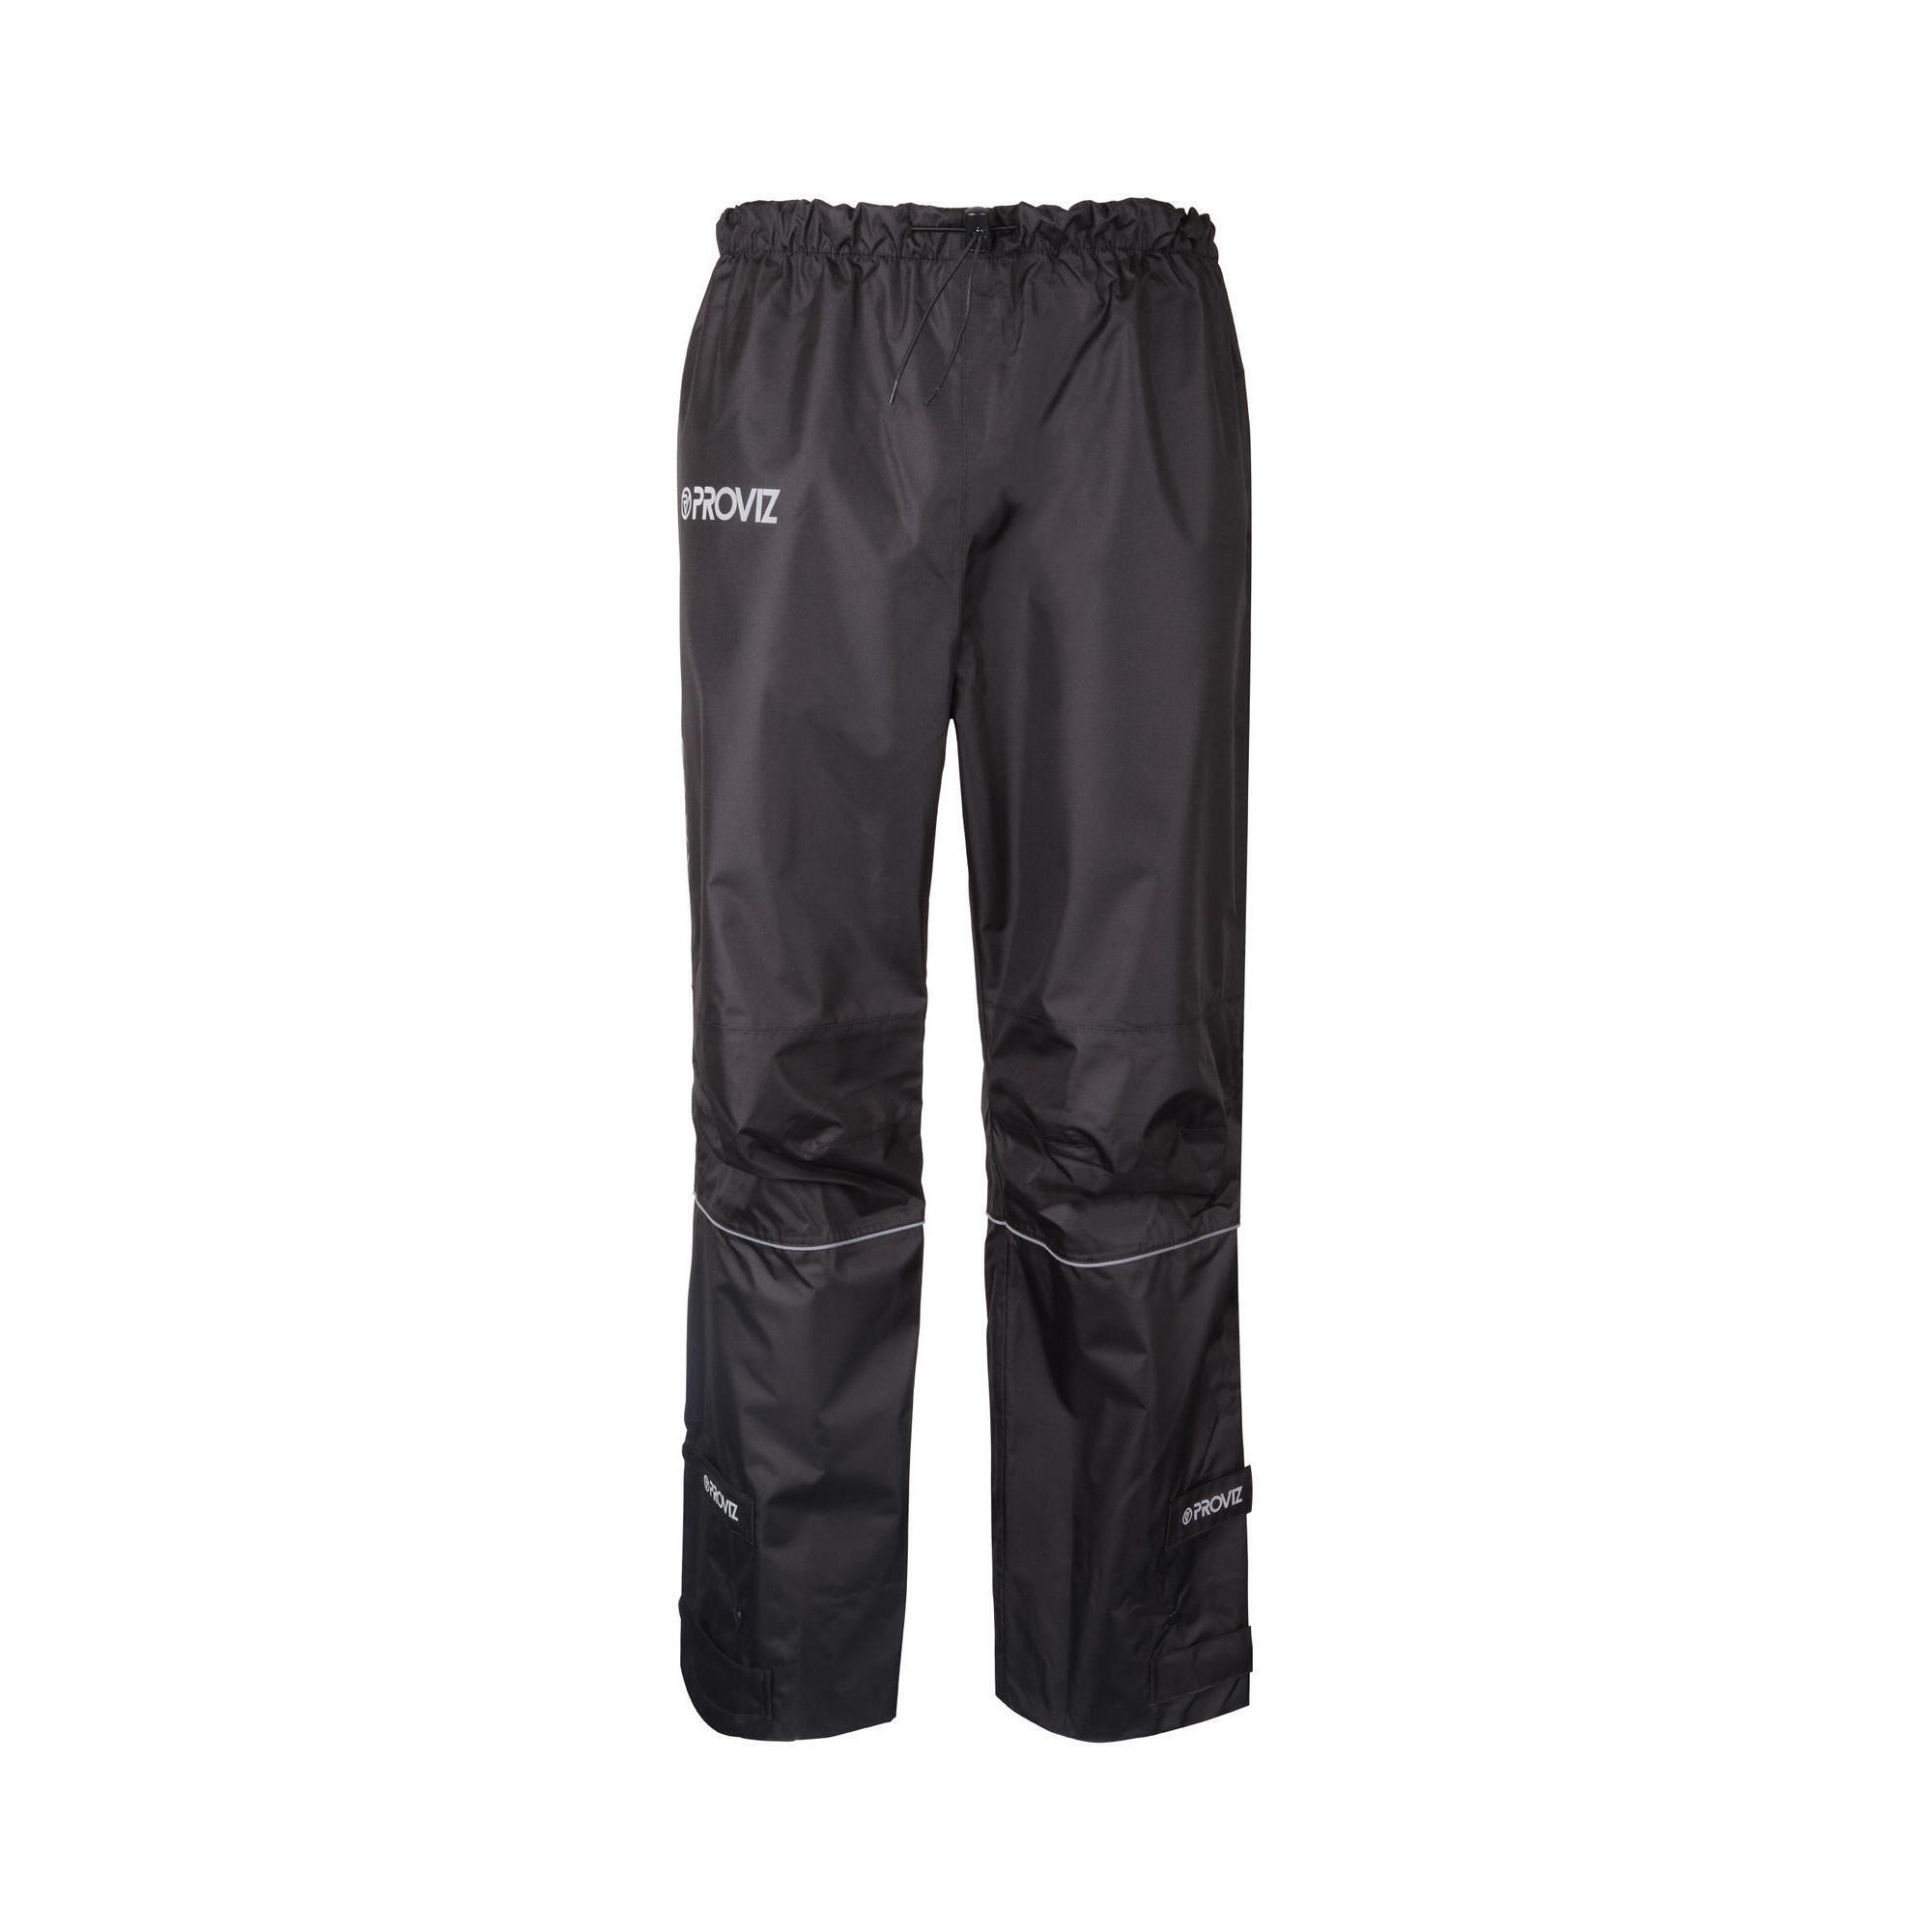 Proviz Nightrider Reflective Waterproof Breathable Cycling Trousers 3/6